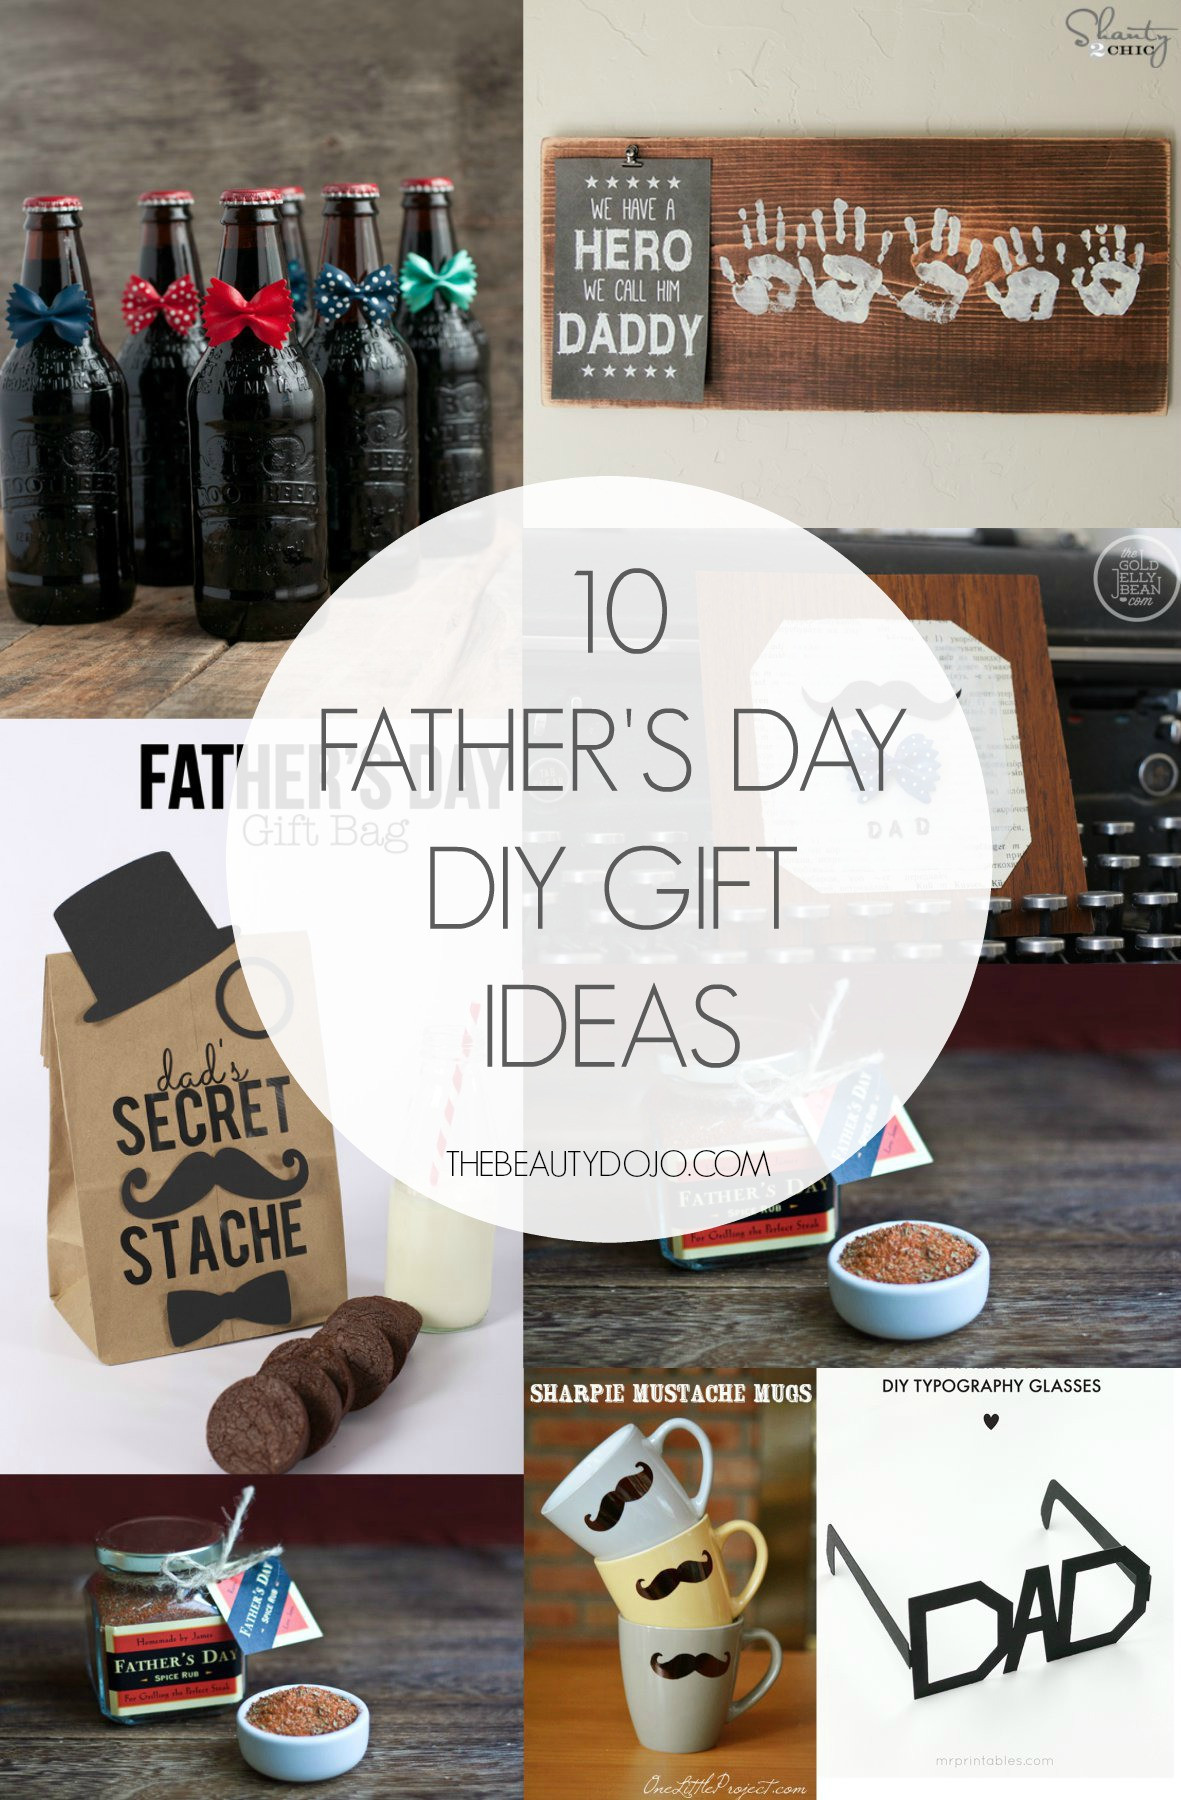 Diy Fathers Day Gift
 10 Father s Day DIY Gift Ideas The Beautydojo